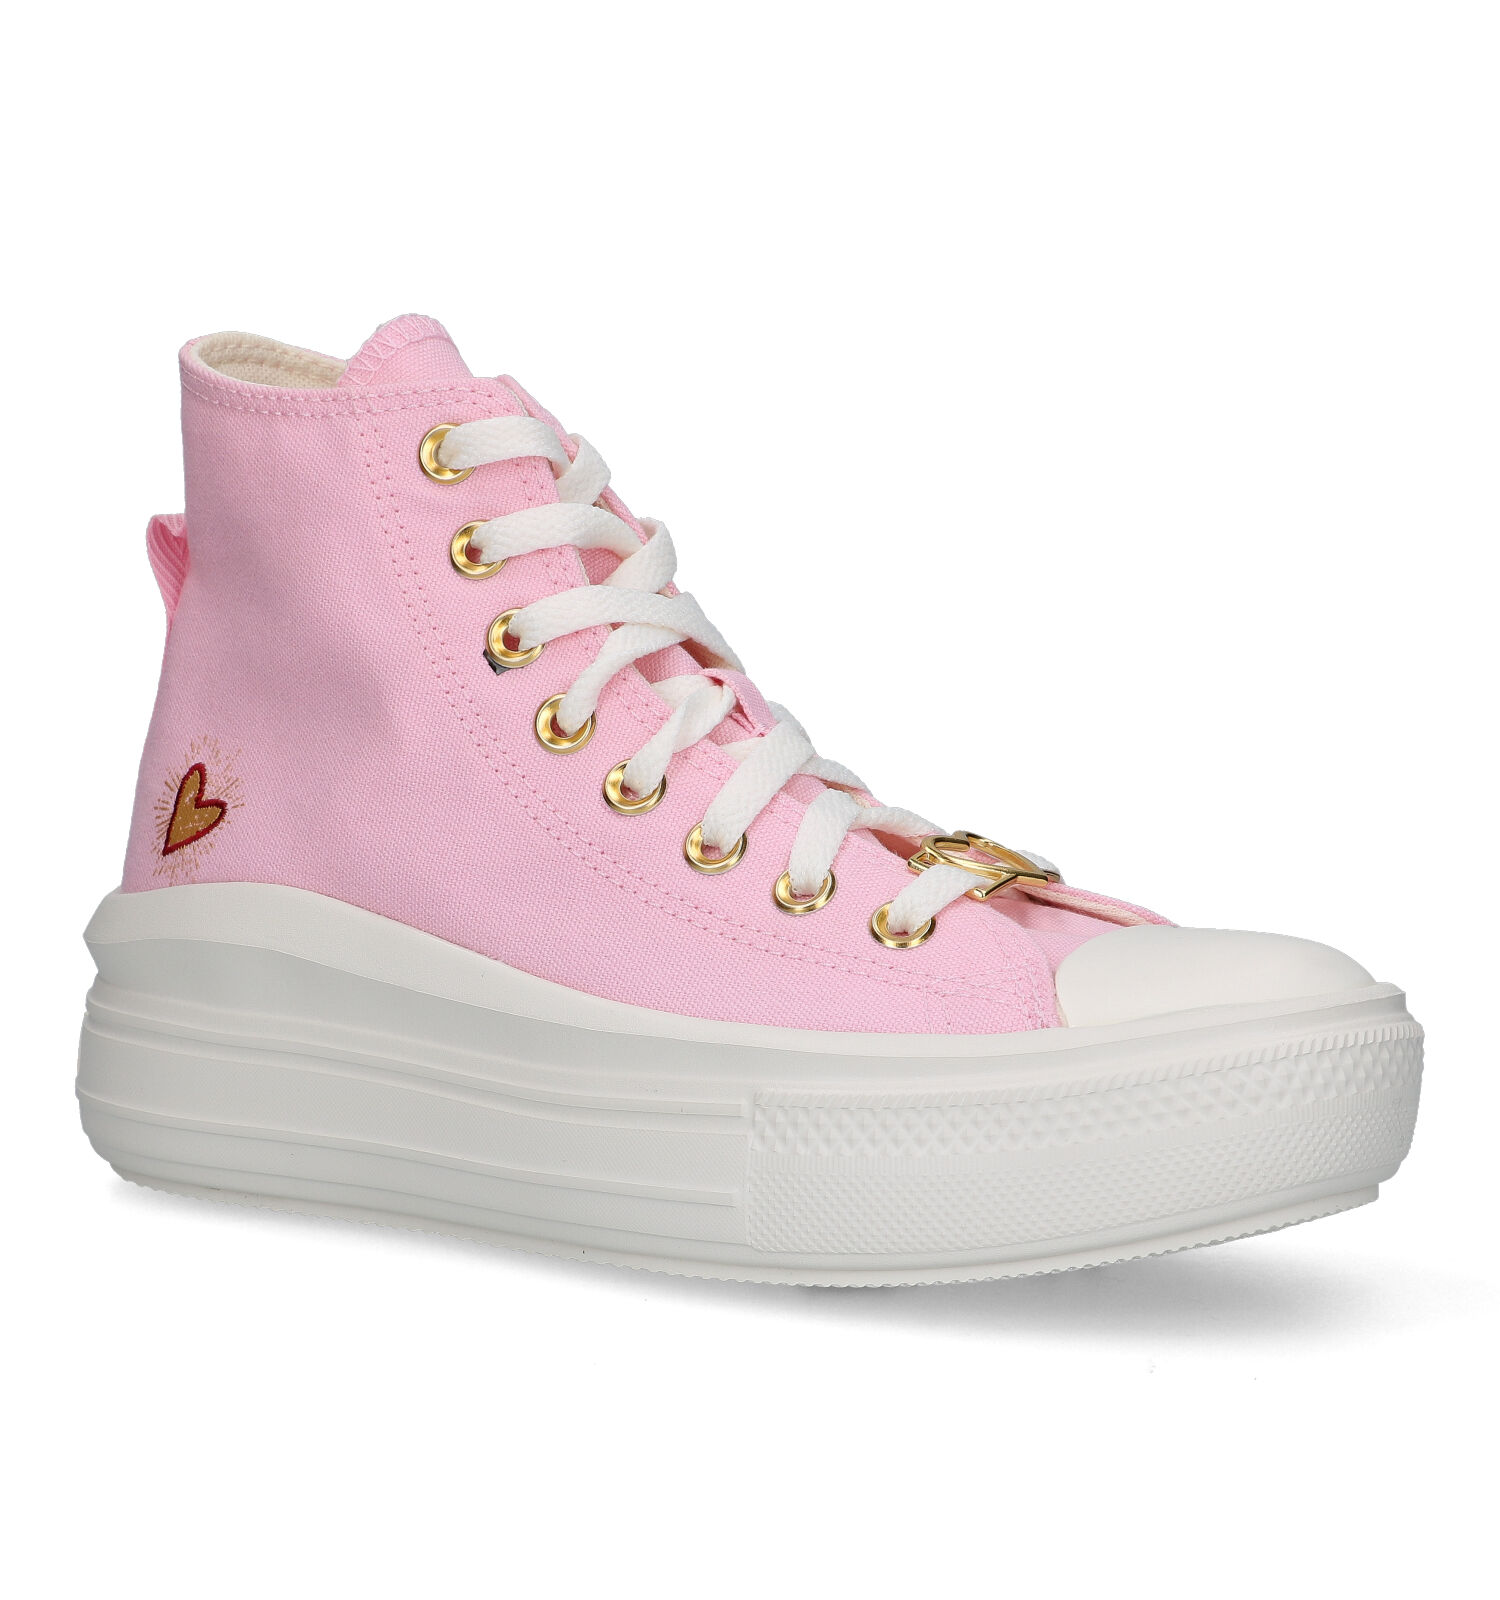 Converse CT All Star Move Roze Sneakers Dames Sneakers